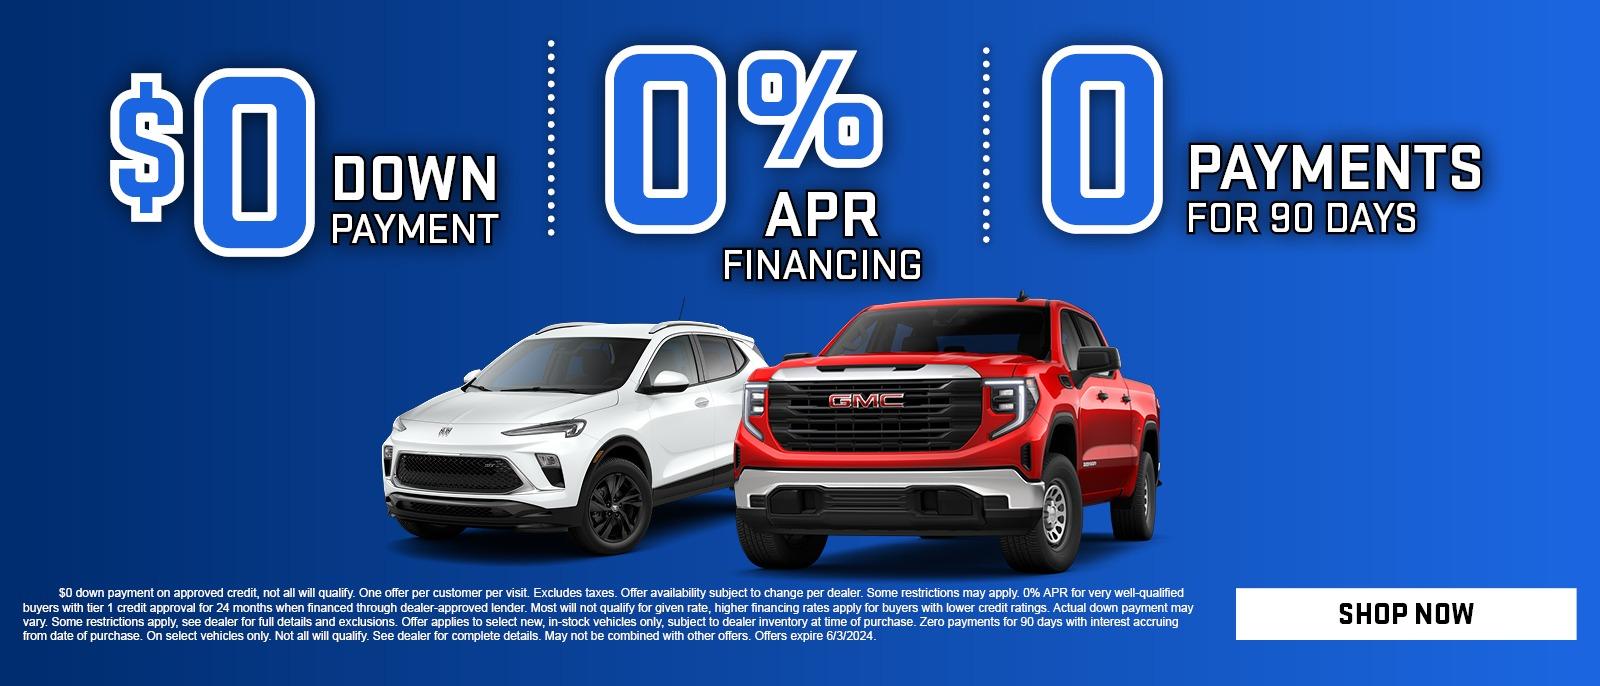 $0 Down Payments | 0% APR | 0 Payments for 90 days